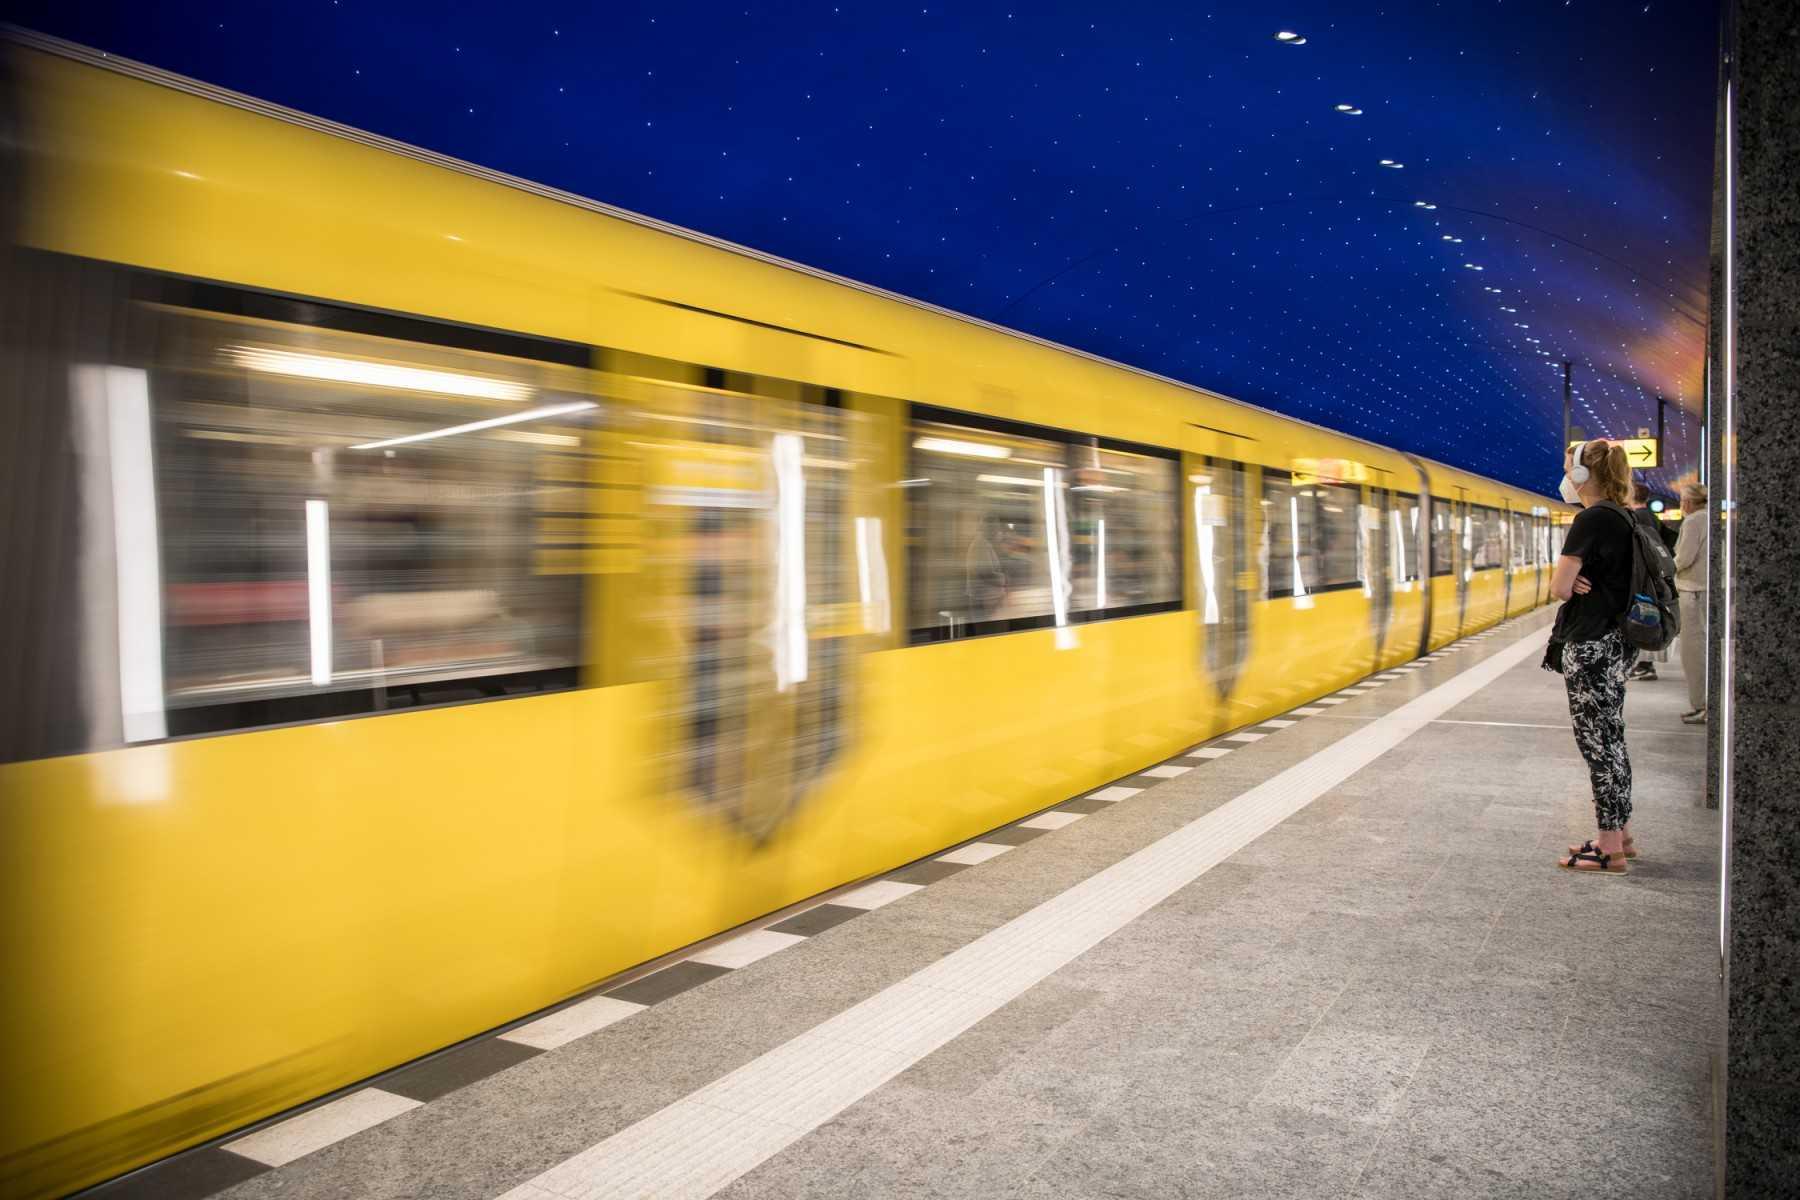 A train of BVG public transport company arrives at the Museumsinsel (museum island) subway station in Mitte district in Berlin on July 23, 2021. Photo: AFP 